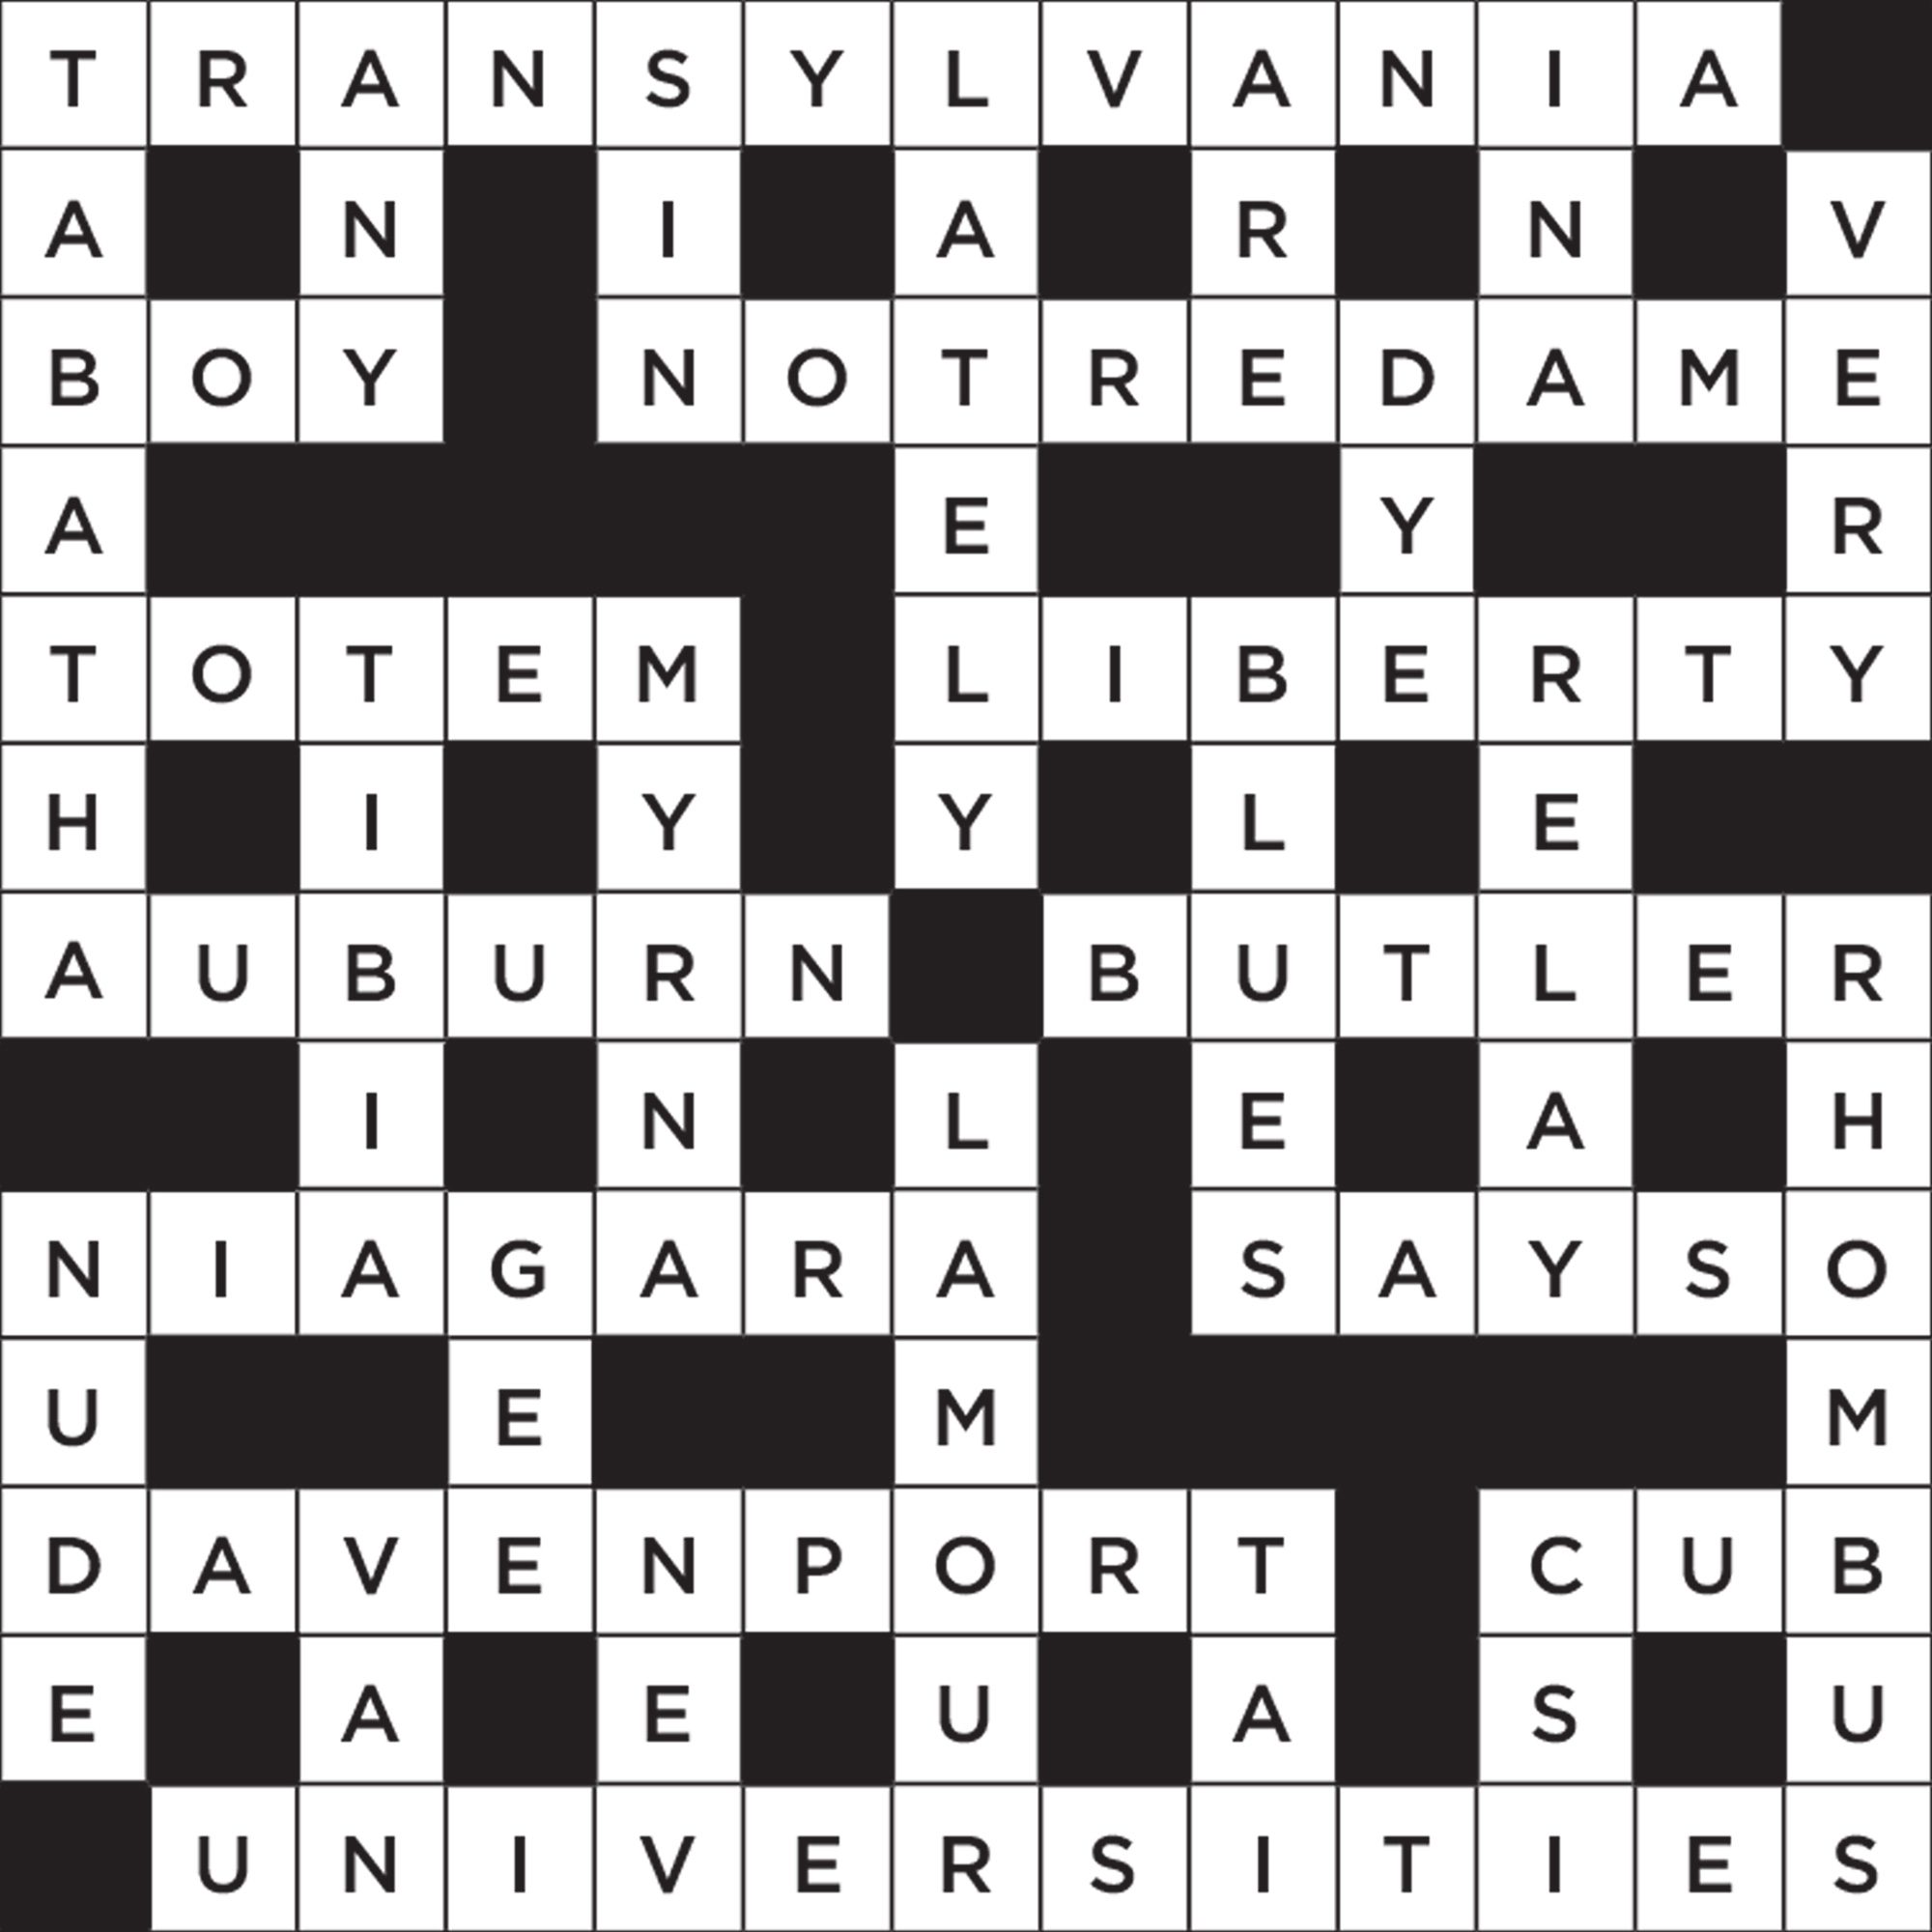 seven themed crossword puzzle